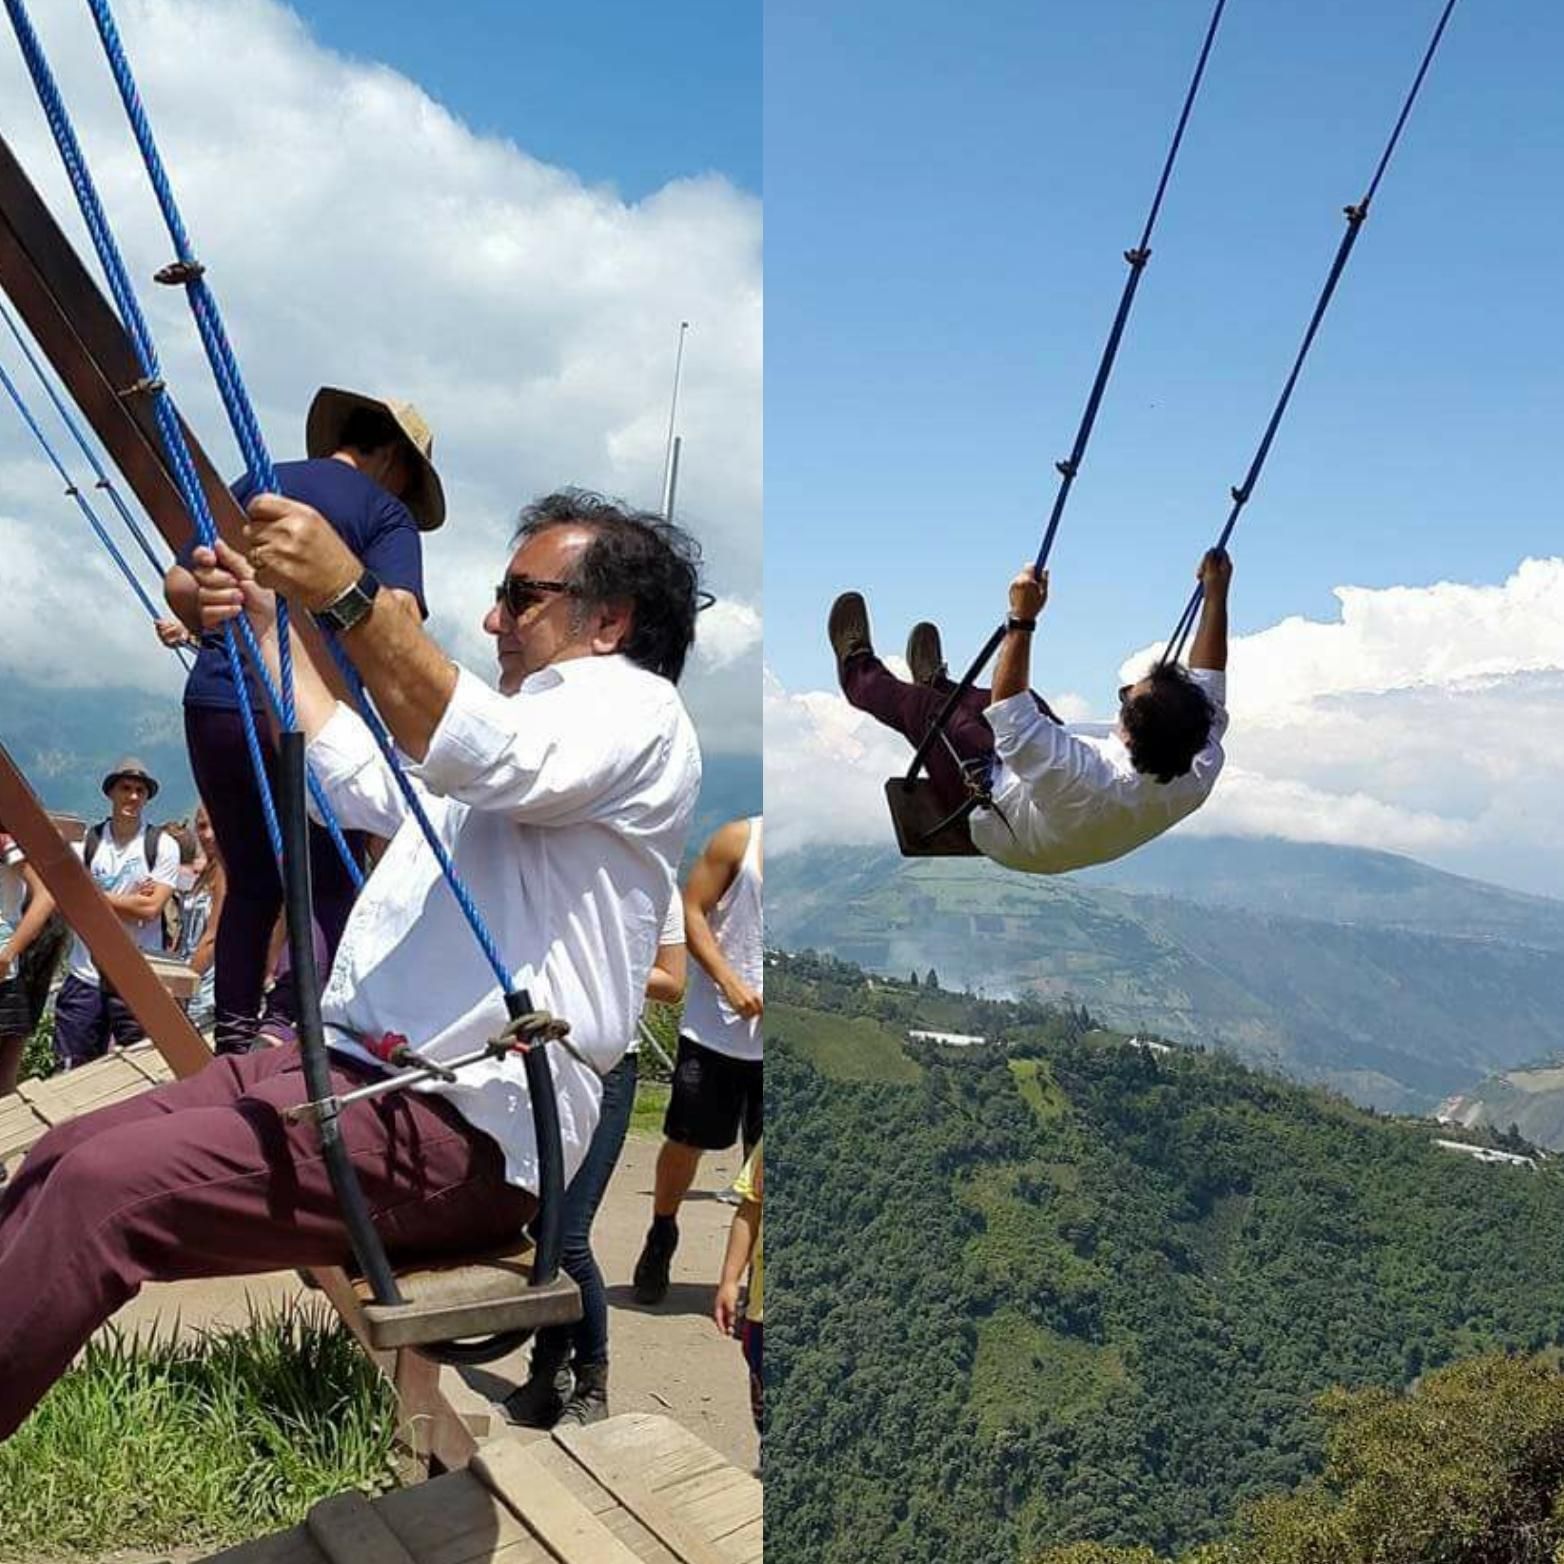 For his 65th birthday, my dad traveled to Ecuador to ride the "Swing at the End of the World." I need to get on his level.